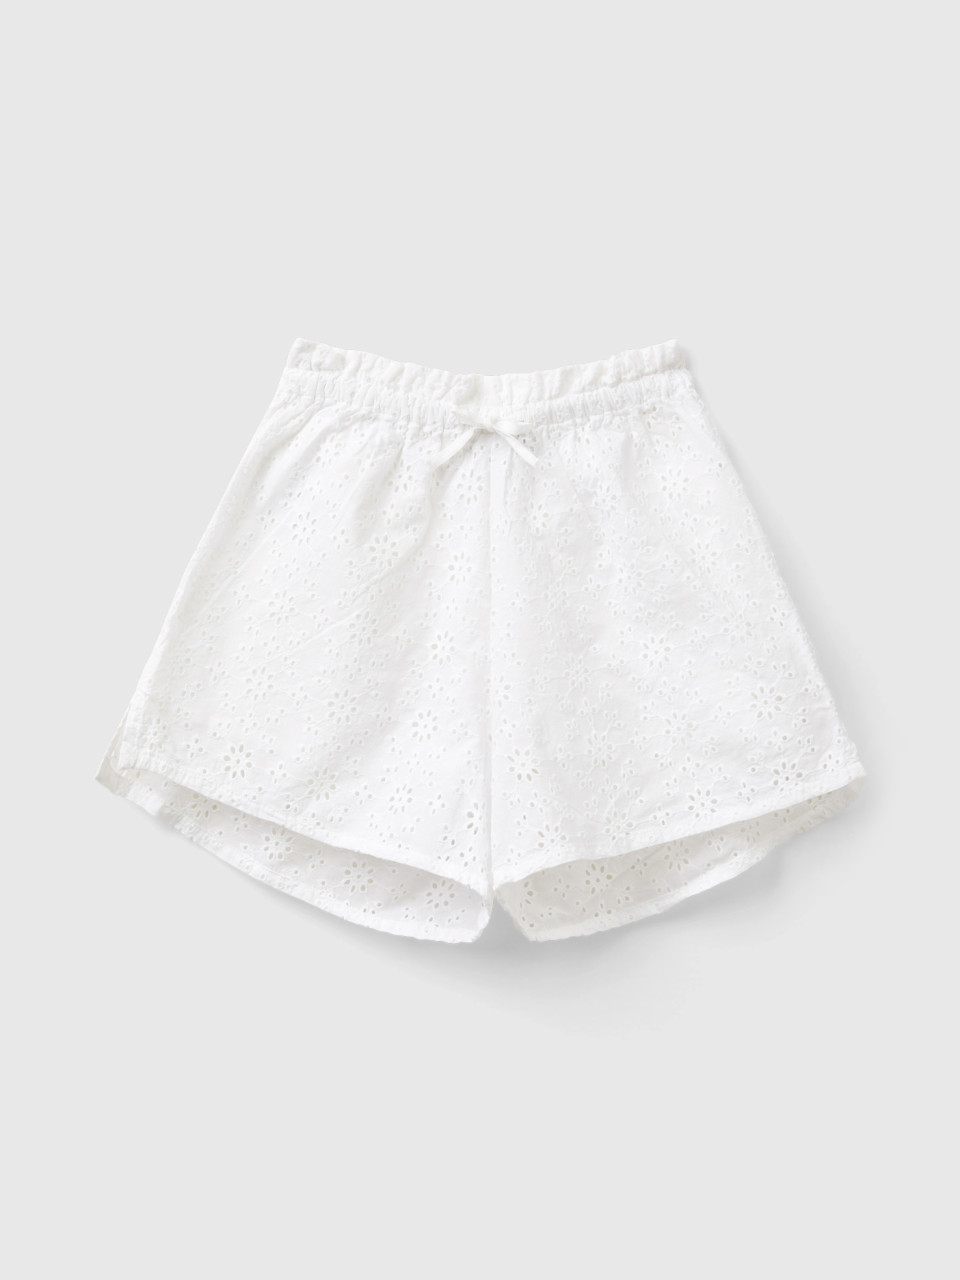 Benetton, Shorts With Broderie Anglaise Embroidery, White, Kids